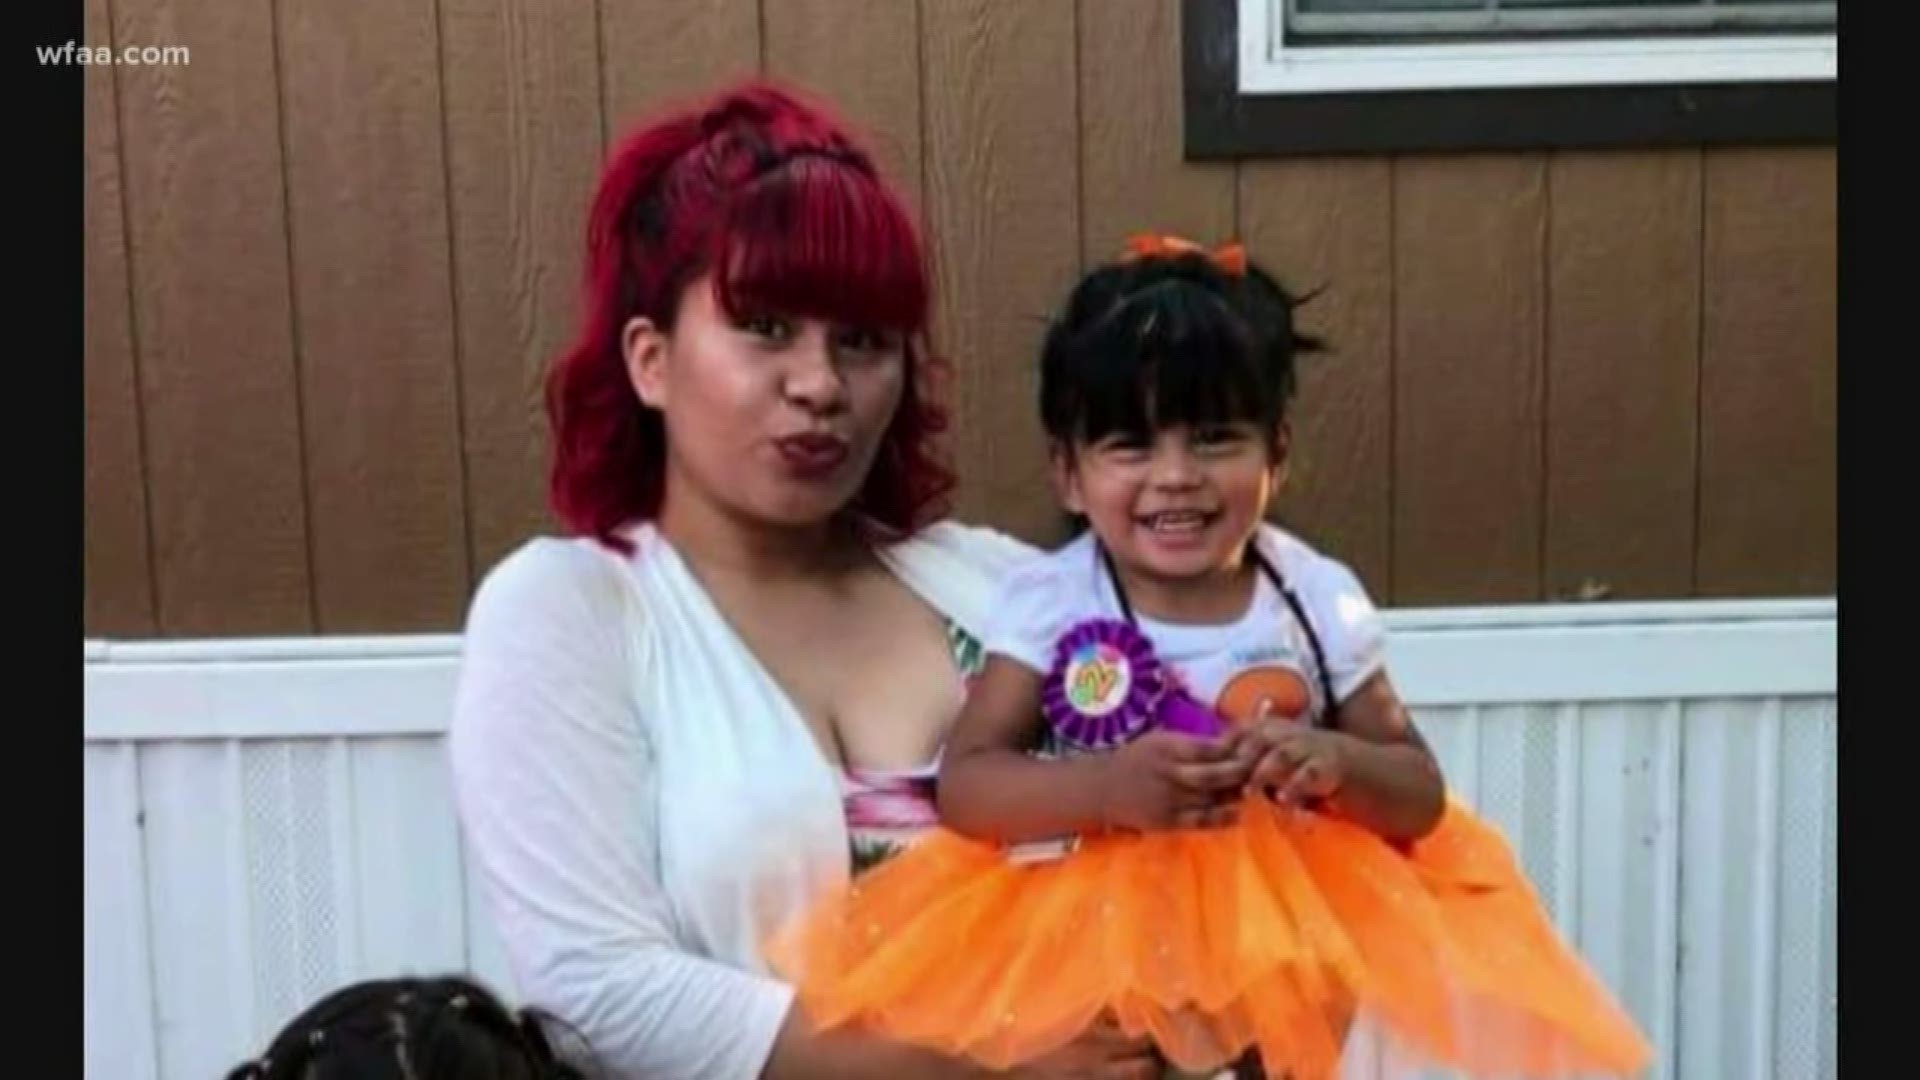 Dive crews found the woman and a toddler dead in the car.  Family identified the victims as Jessica Romero, 18, and her 2-year-old daughter Llaylanii.  A Gofundme account has been set up to help the family. 